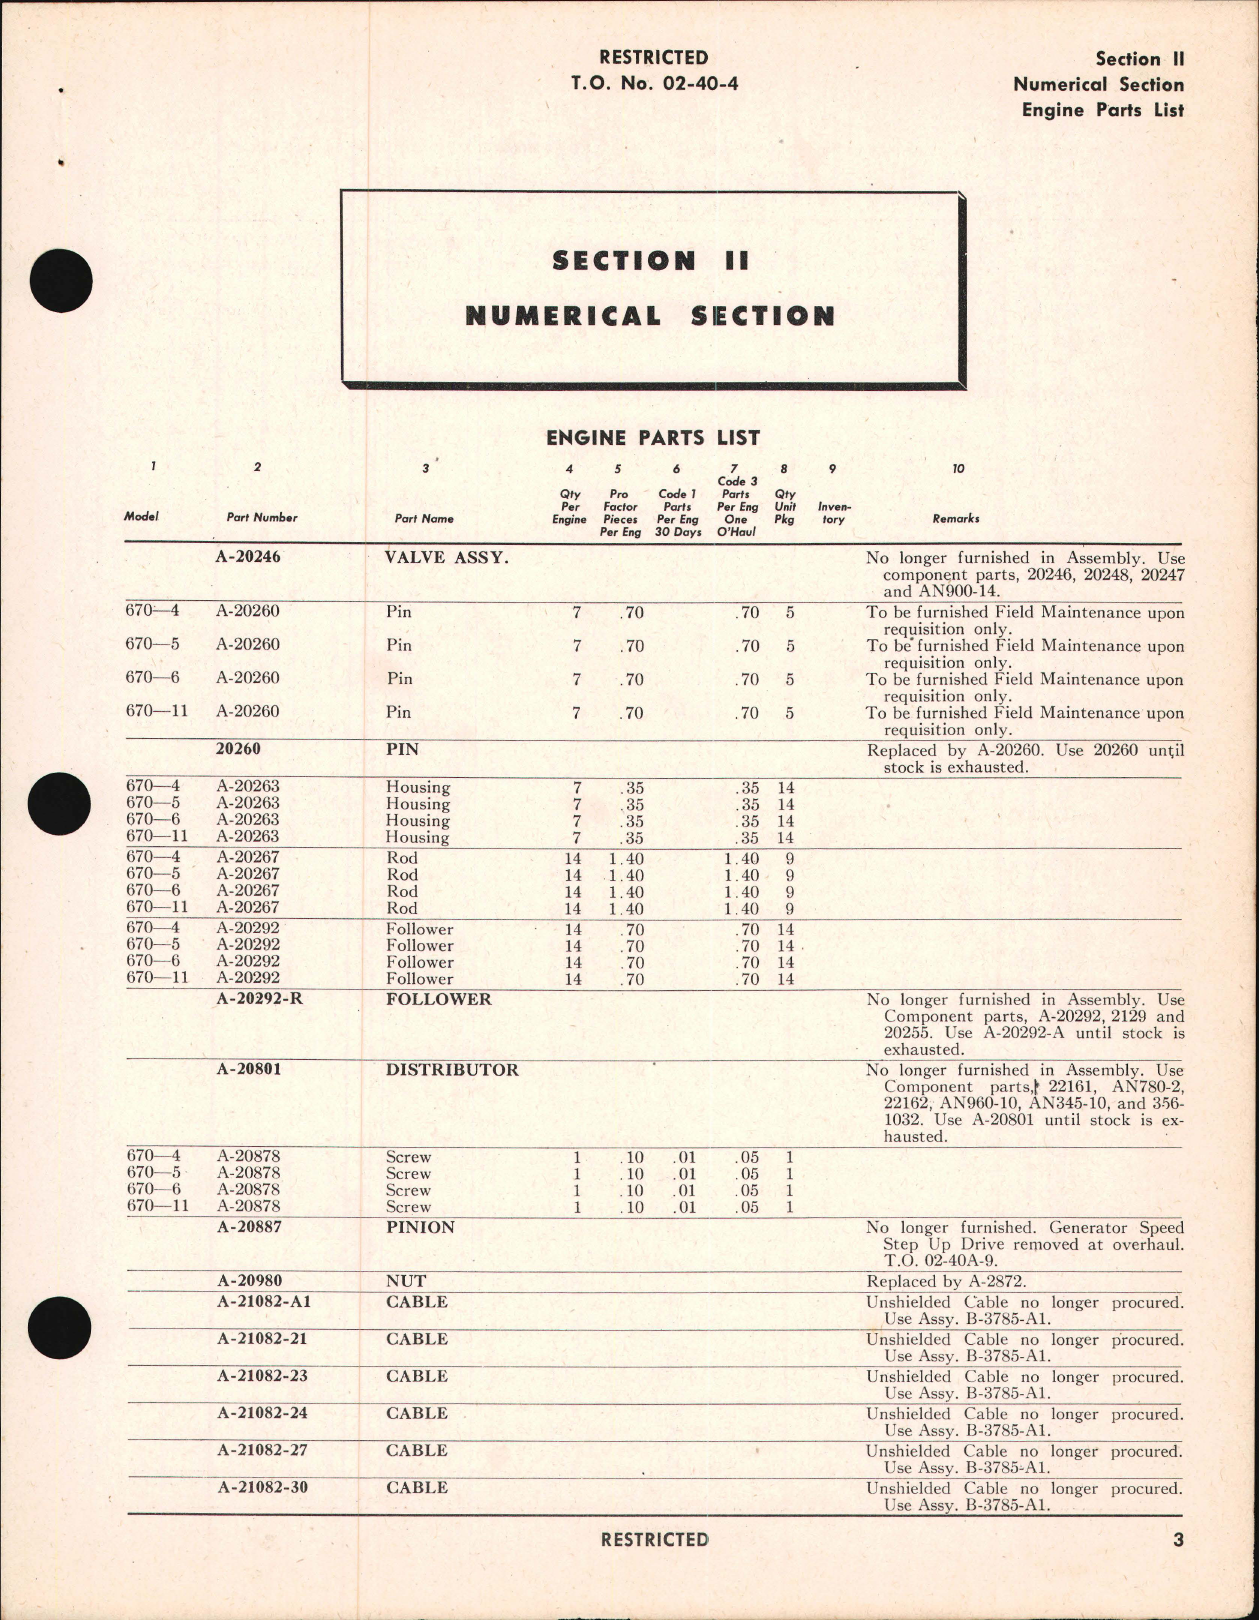 Sample page 5 from AirCorps Library document: Master Interchangeable Parts List & Requisitioning Guide for O-170-3, R-670-4, R-670-5, R-670-6, and R-670-11 Engines